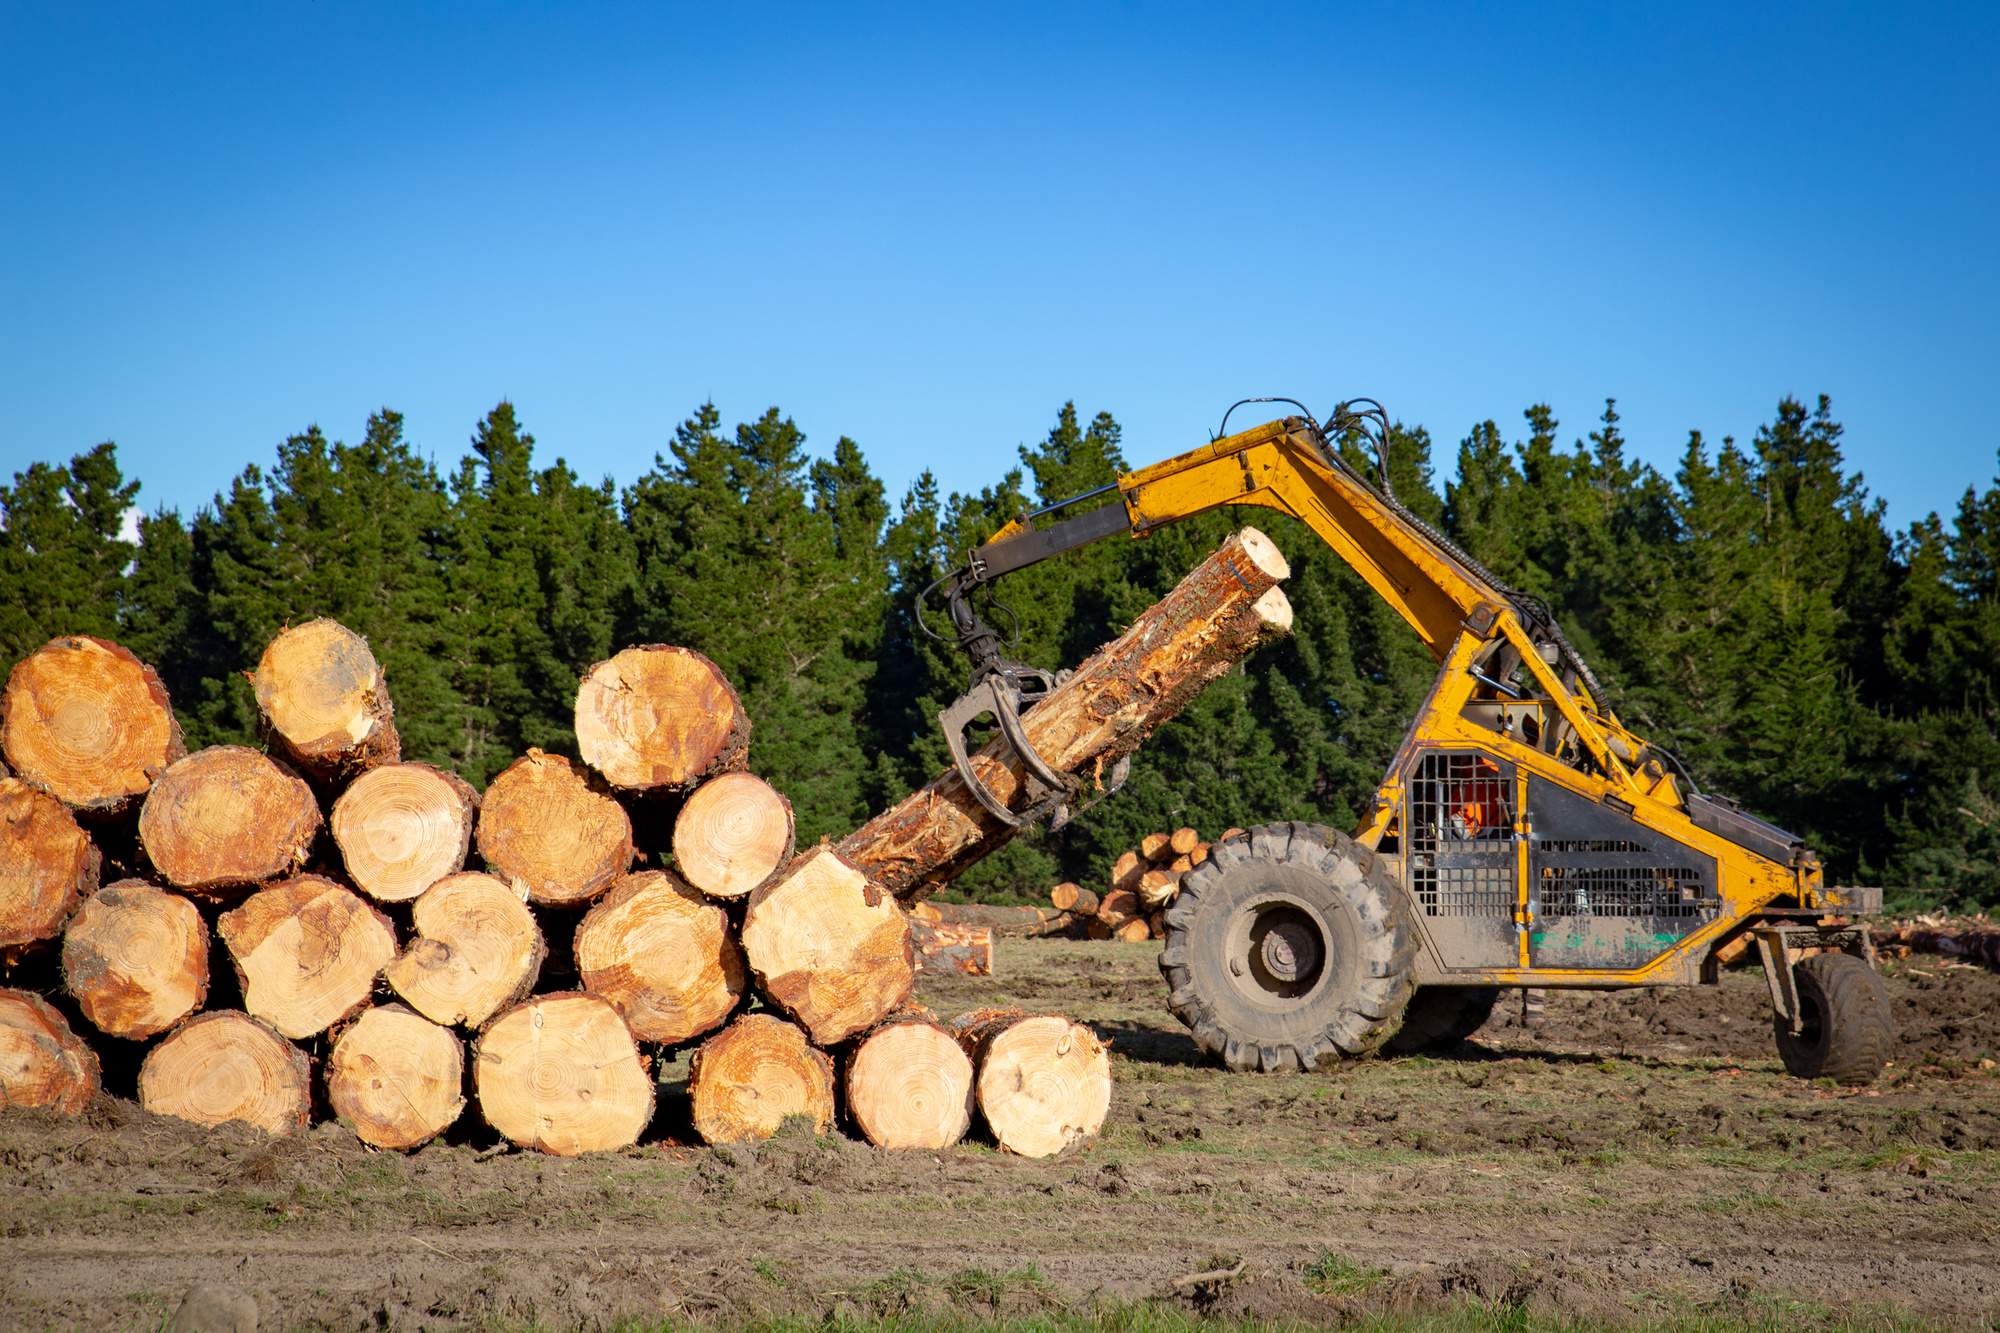 Timber vs Lumber: What’s the Difference?